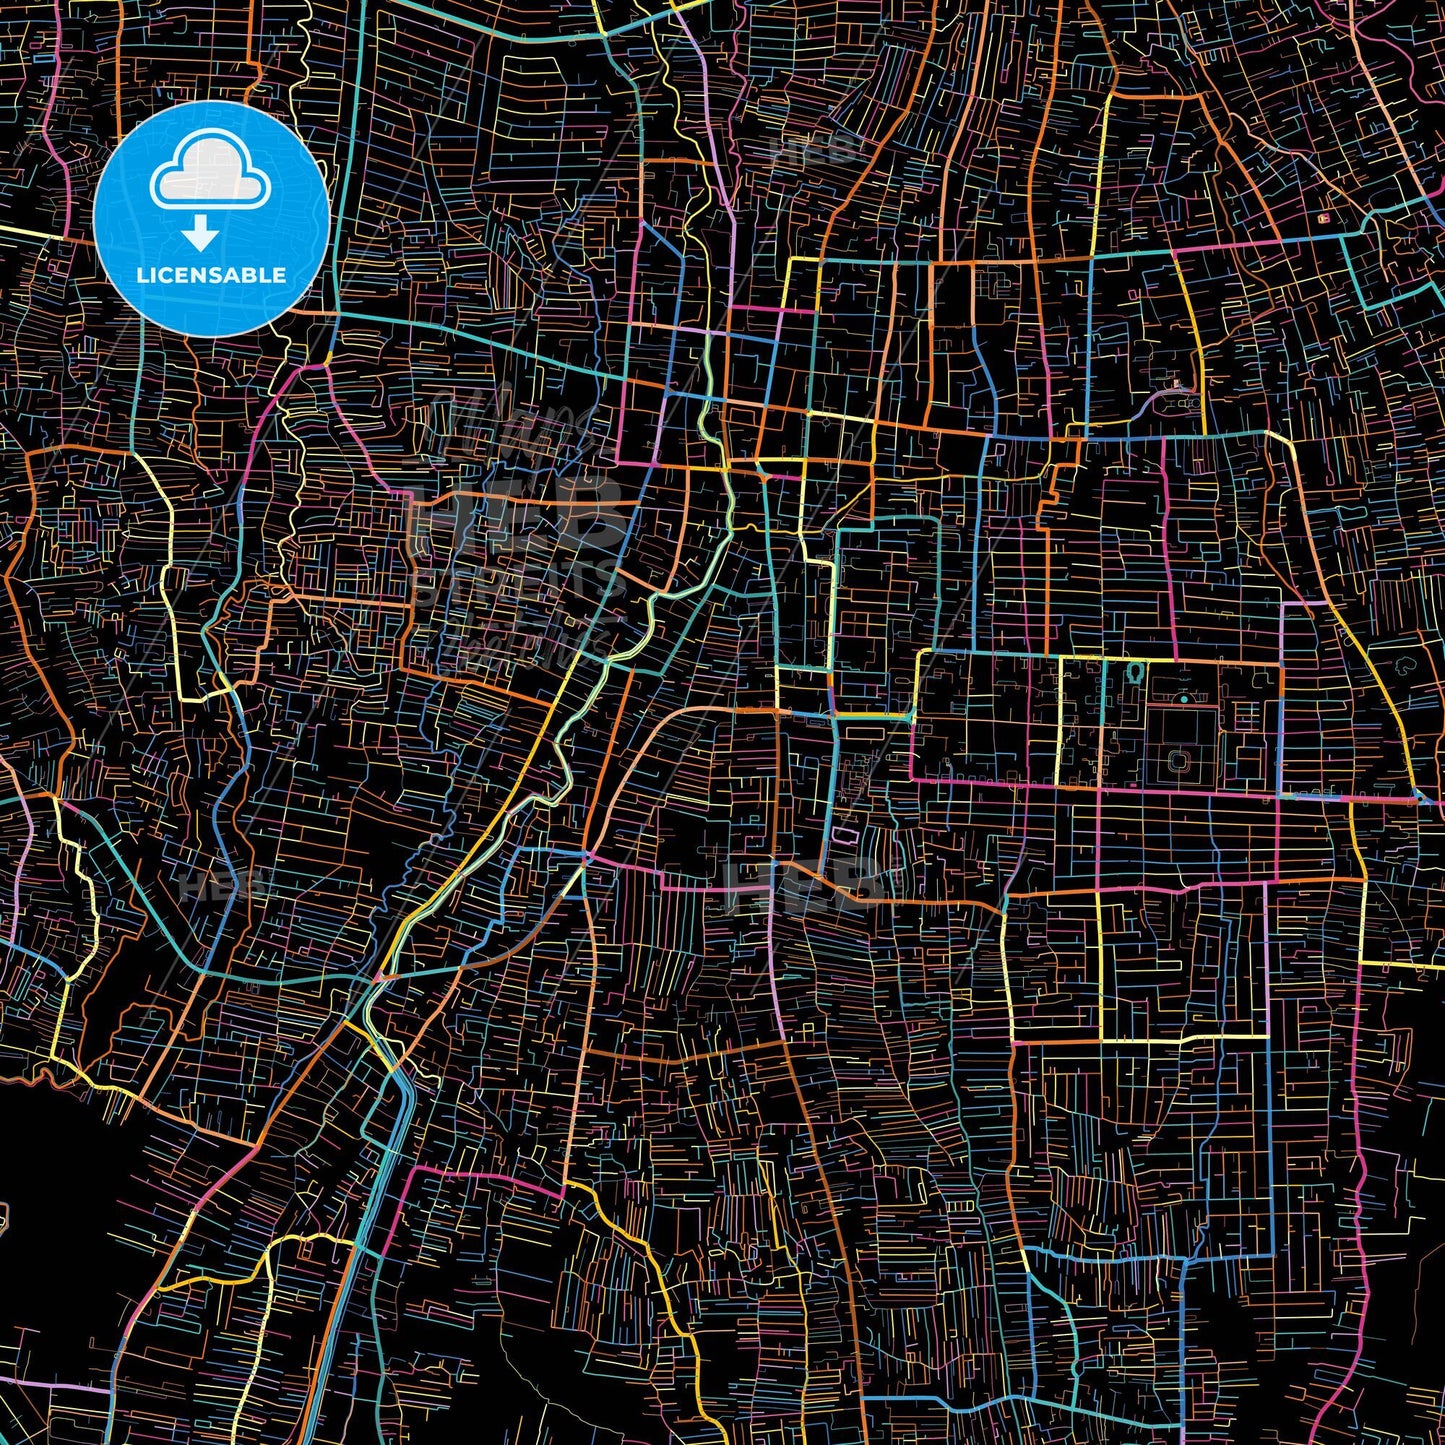 Denpasar, Bali, Indonesia, colorful city map on black background